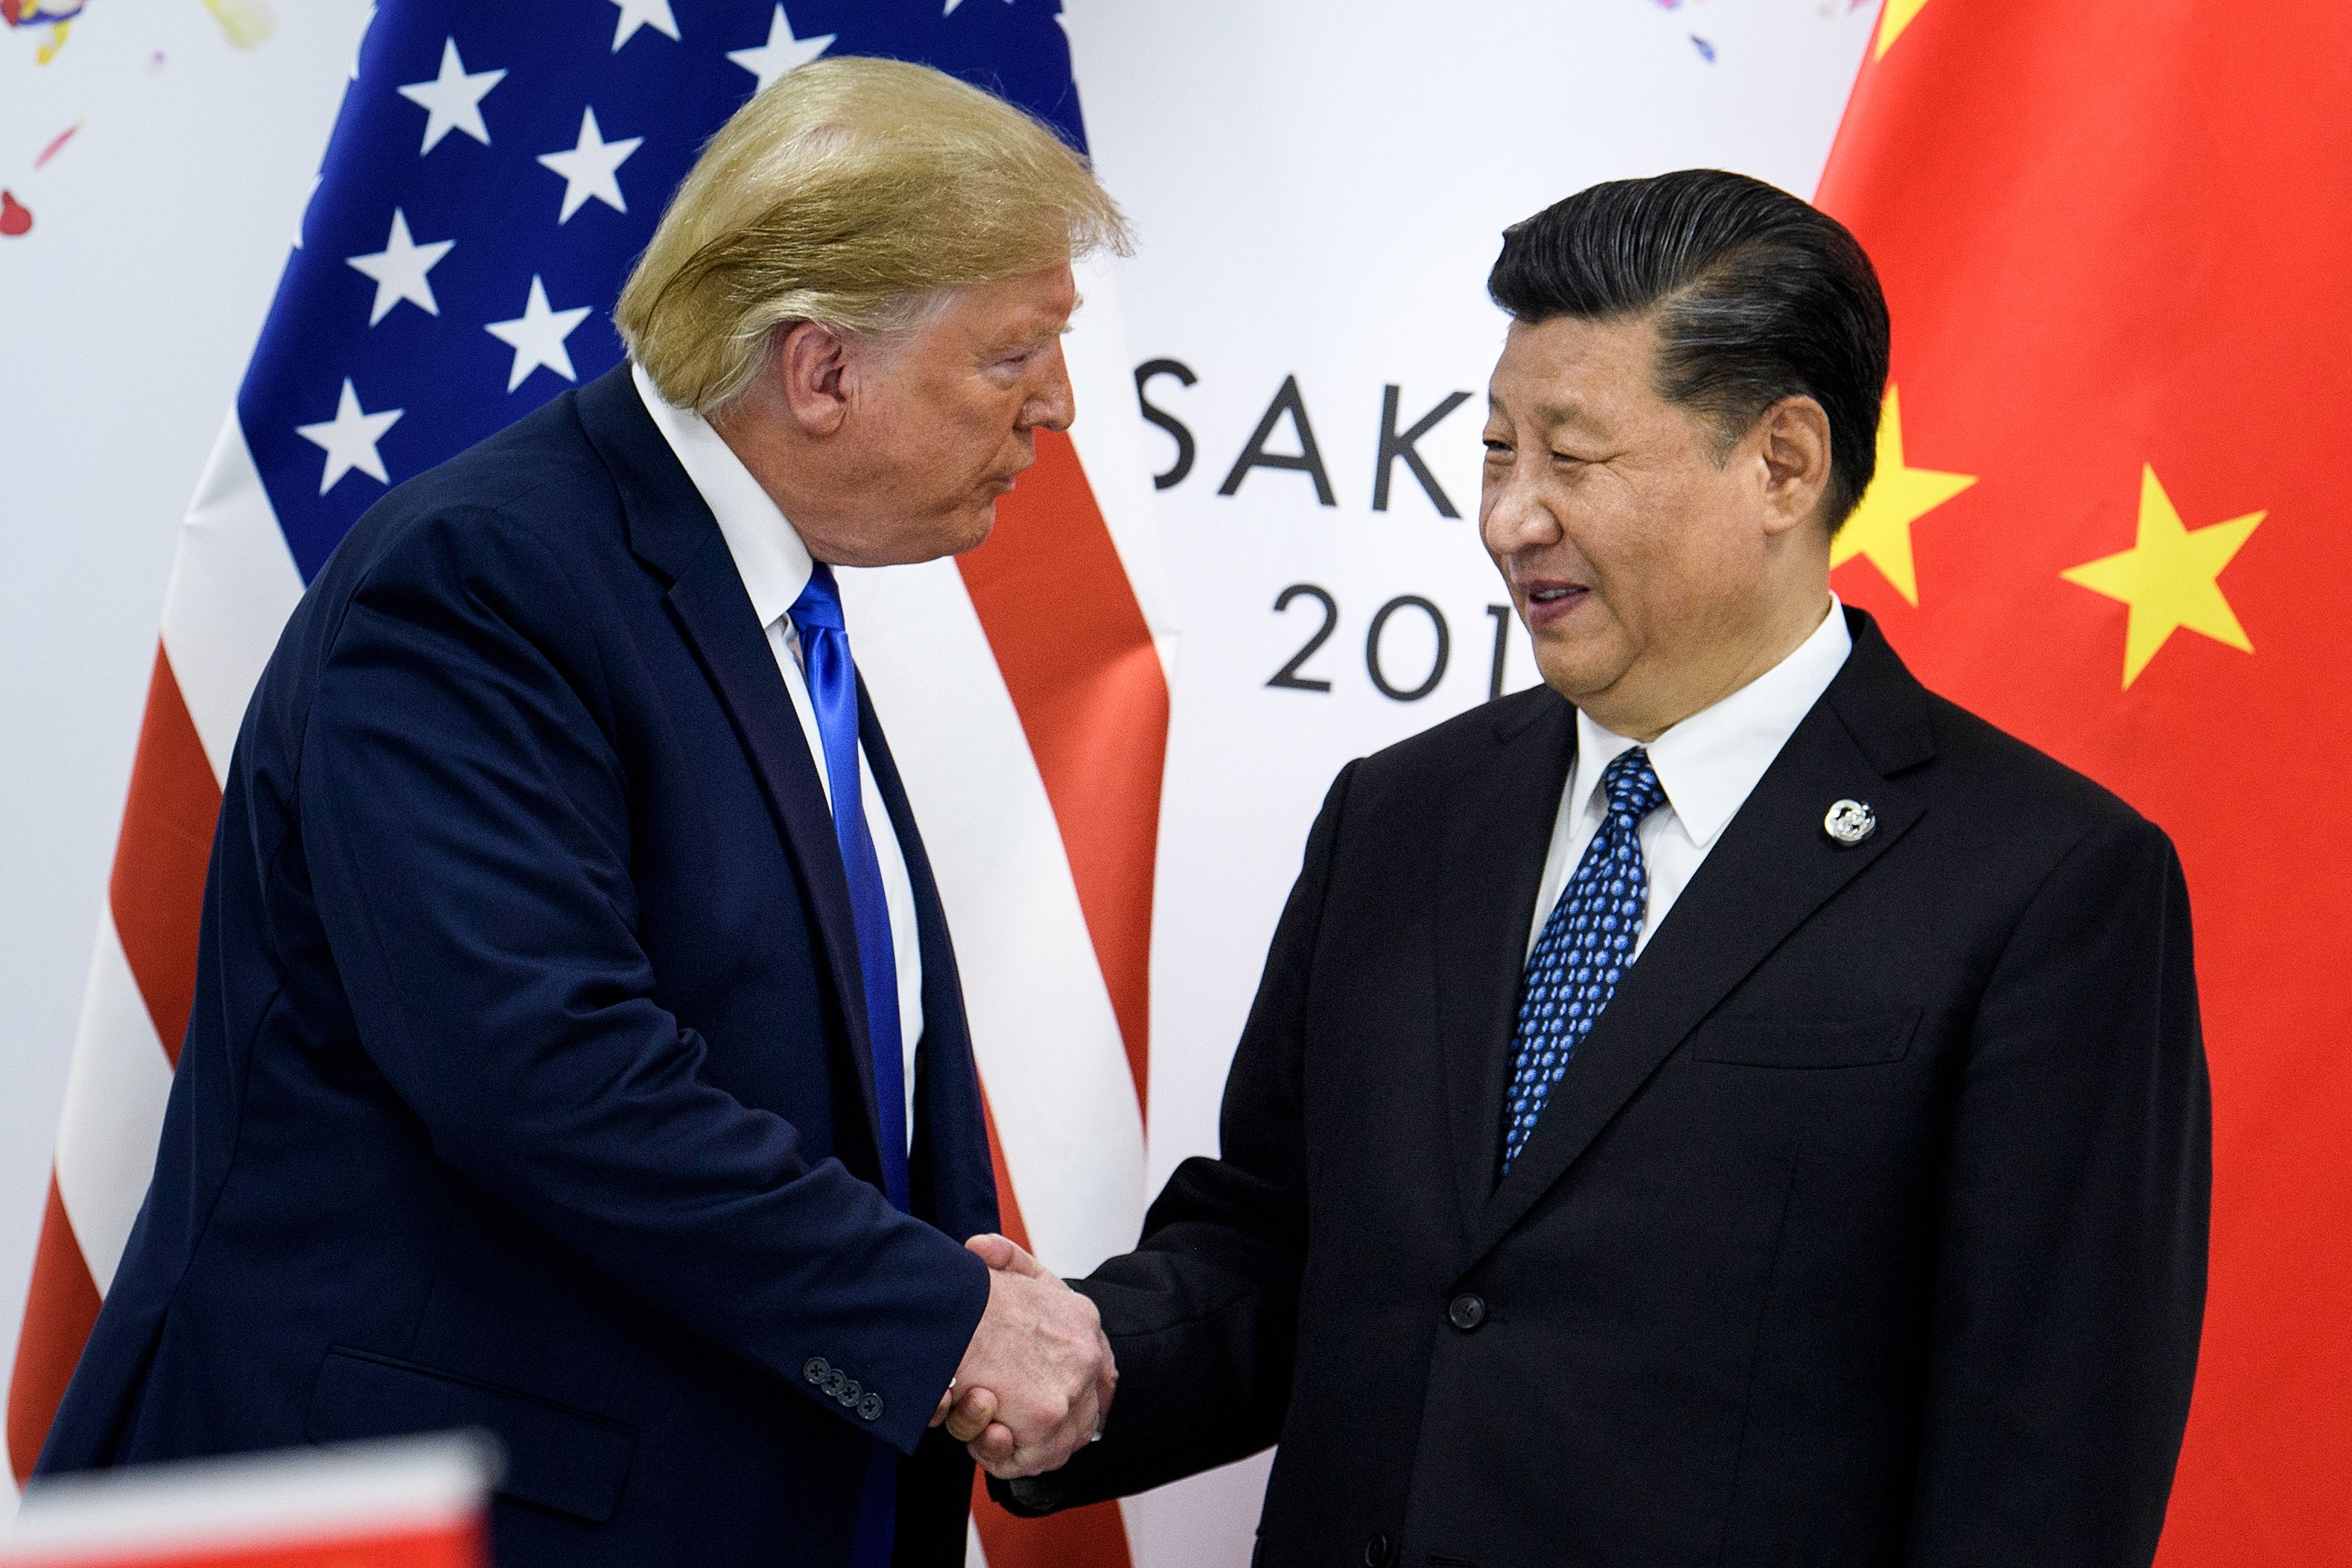 In this file photo taken on June 28, 2019, China's President Xi Jinping shakes hands with US President Donald Trump before a bilateral meeting on the sidelines of the G20 Summit in Osaka. (Photo: Brendan Smialowski/AFP via Getty Images)